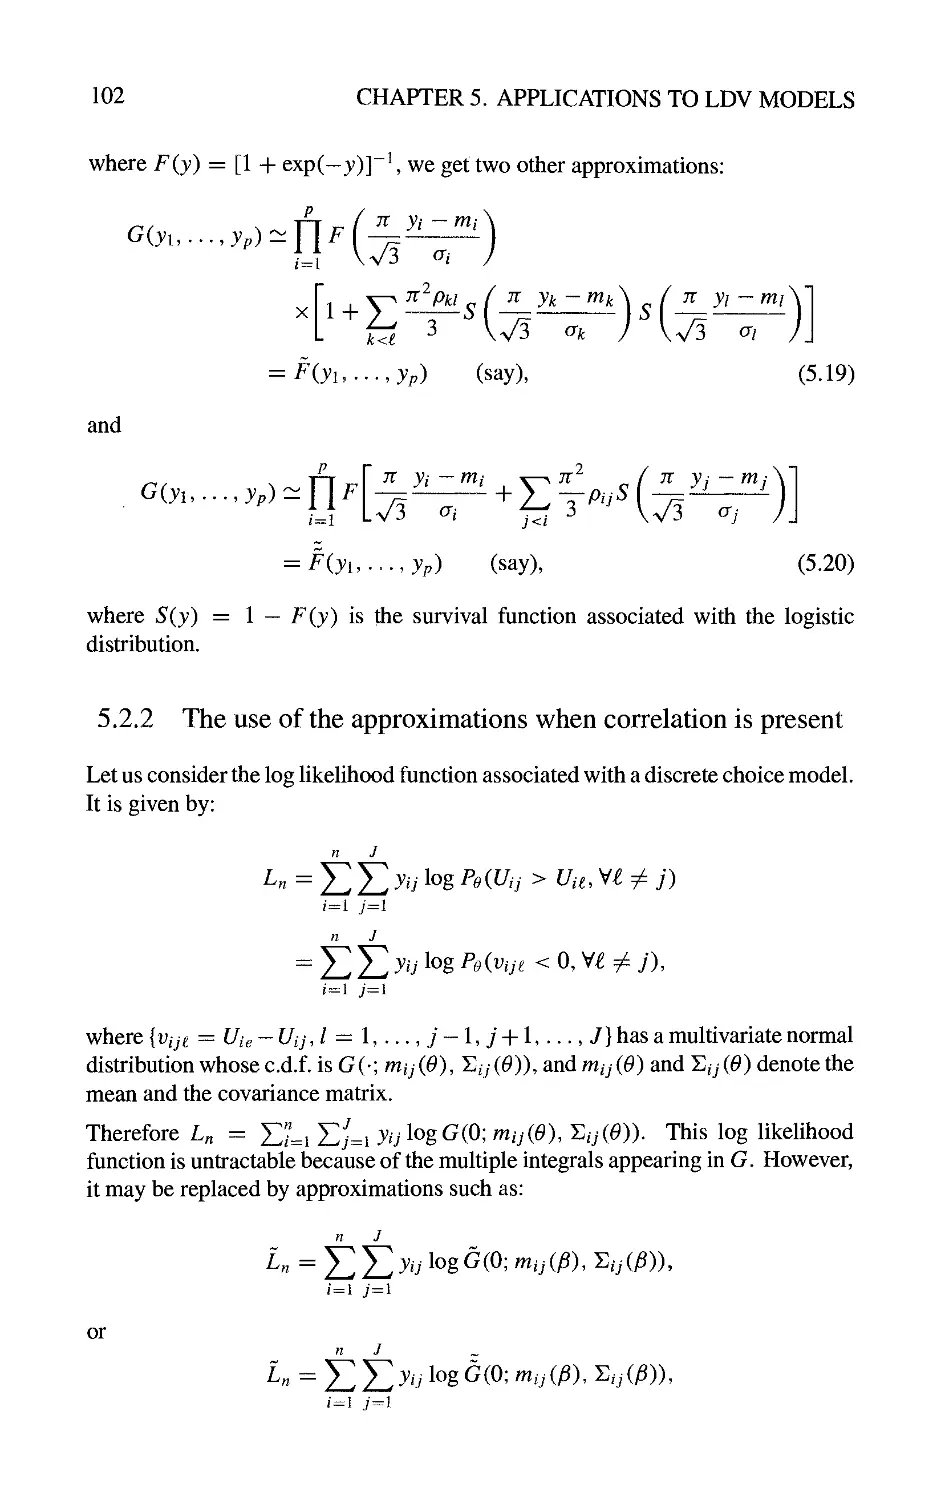 5.2.2 The use of the approximations when correlation is present